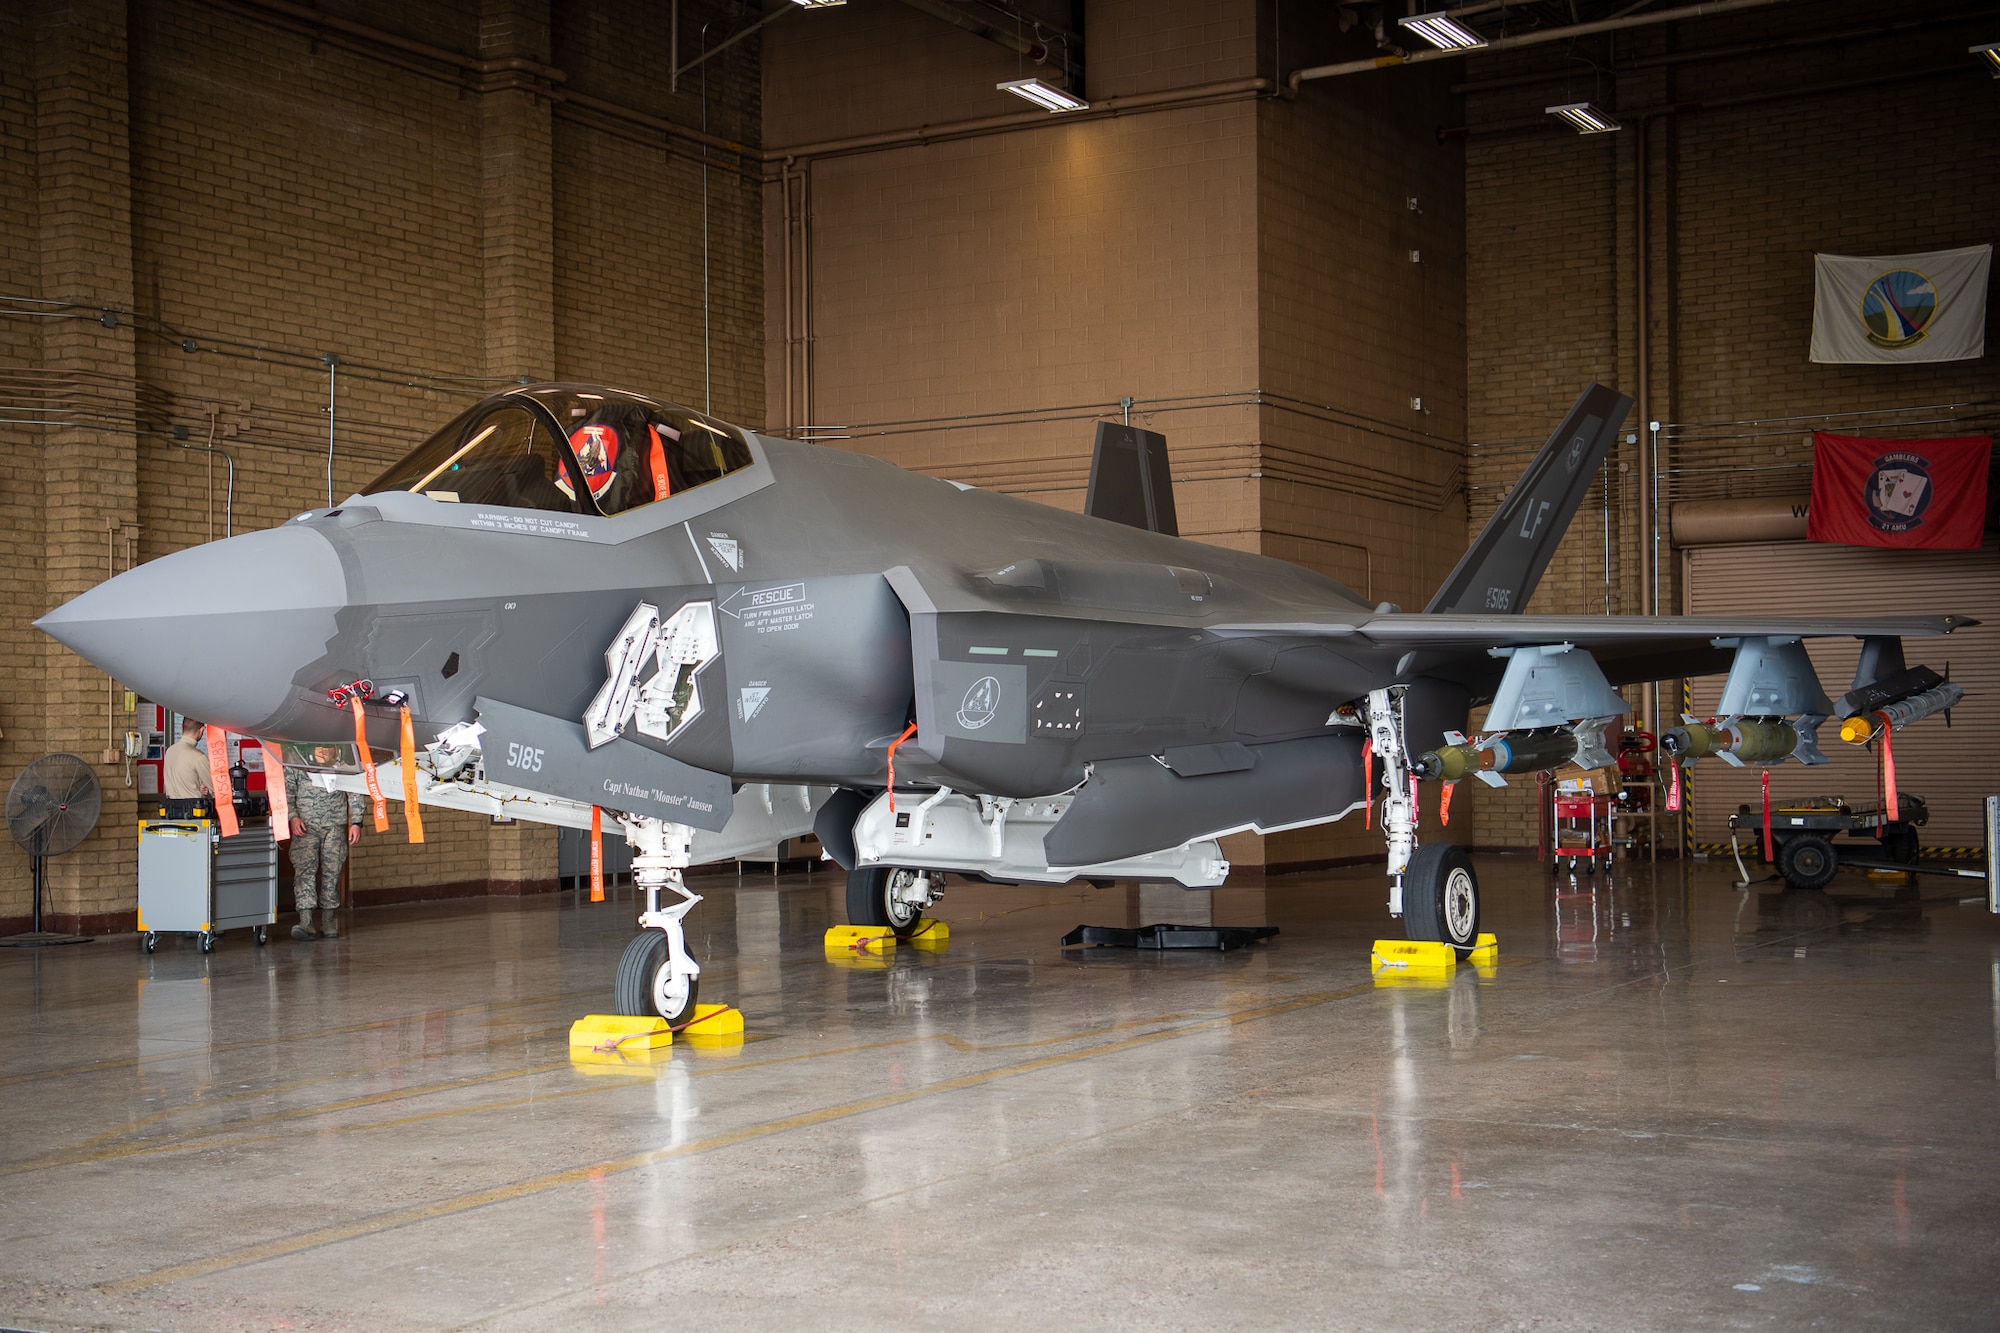 The F-35A Lightning II sits in a hangar loaded with dummy external munitions, Feb. 13, 2019 at Luke Air Force Base, Ariz. After completing the external pylon installation training, the weapons loading standardization crew, a team of three Airmen, became the first team at Luke to be certified on external GBU-12 bomb and AIM-9 missile loading. (U.S. Air Force photo by Airman 1st Class Aspen Reid)